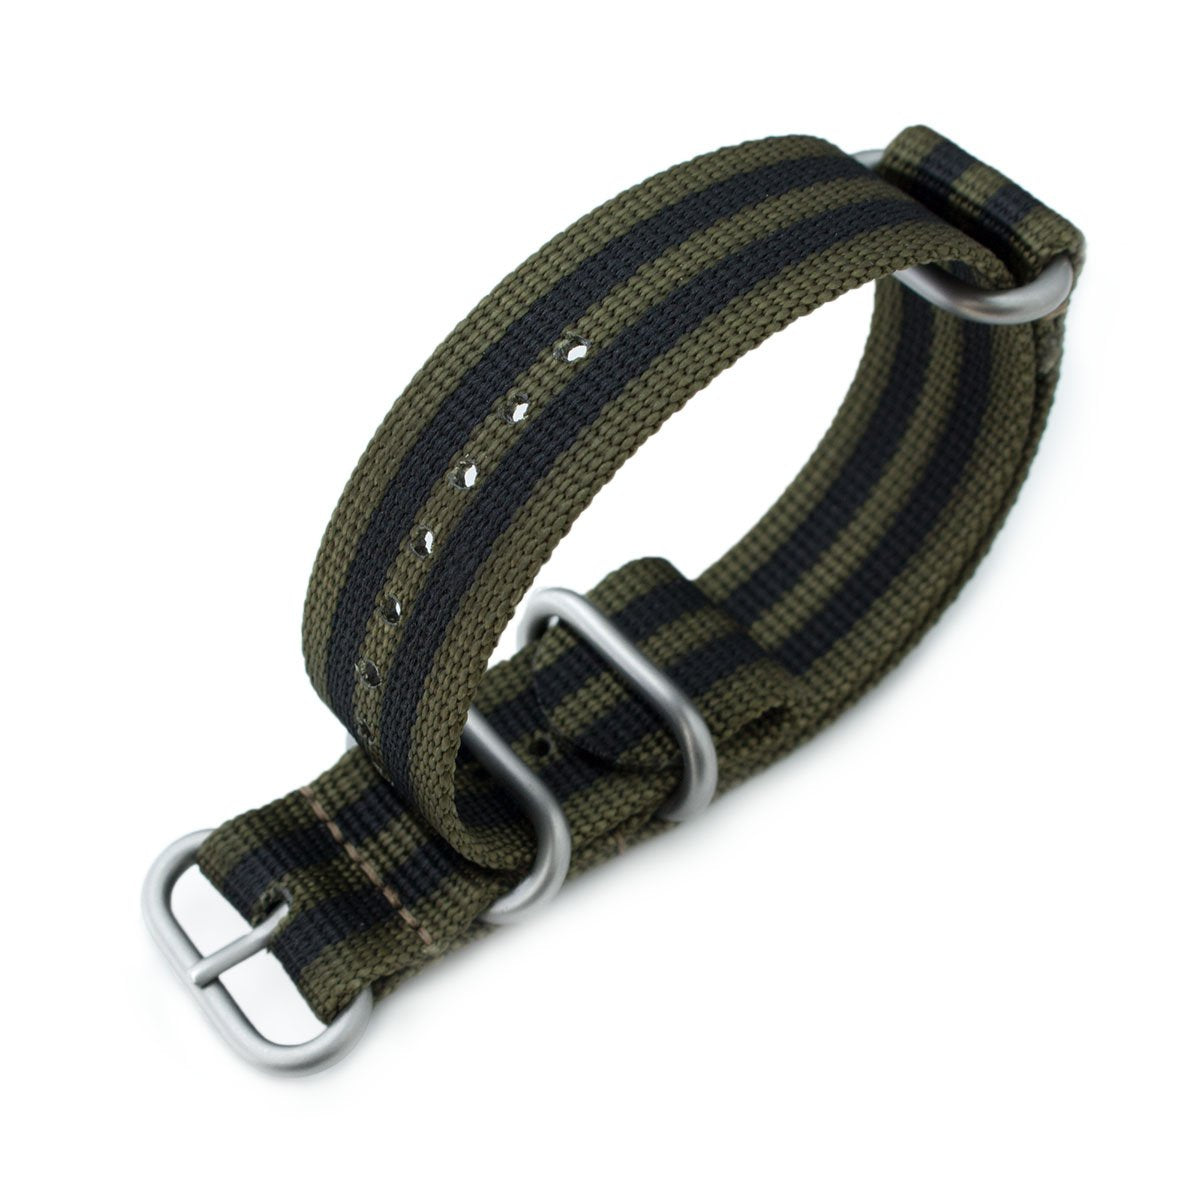 MiLTAT 22mm or 24mm 3 Rings G10 Zulu Watch Strap Ballistic Nylon Armband Forest Green & Black Stripes Sandblasted Buckle Strapcode Watch Bands